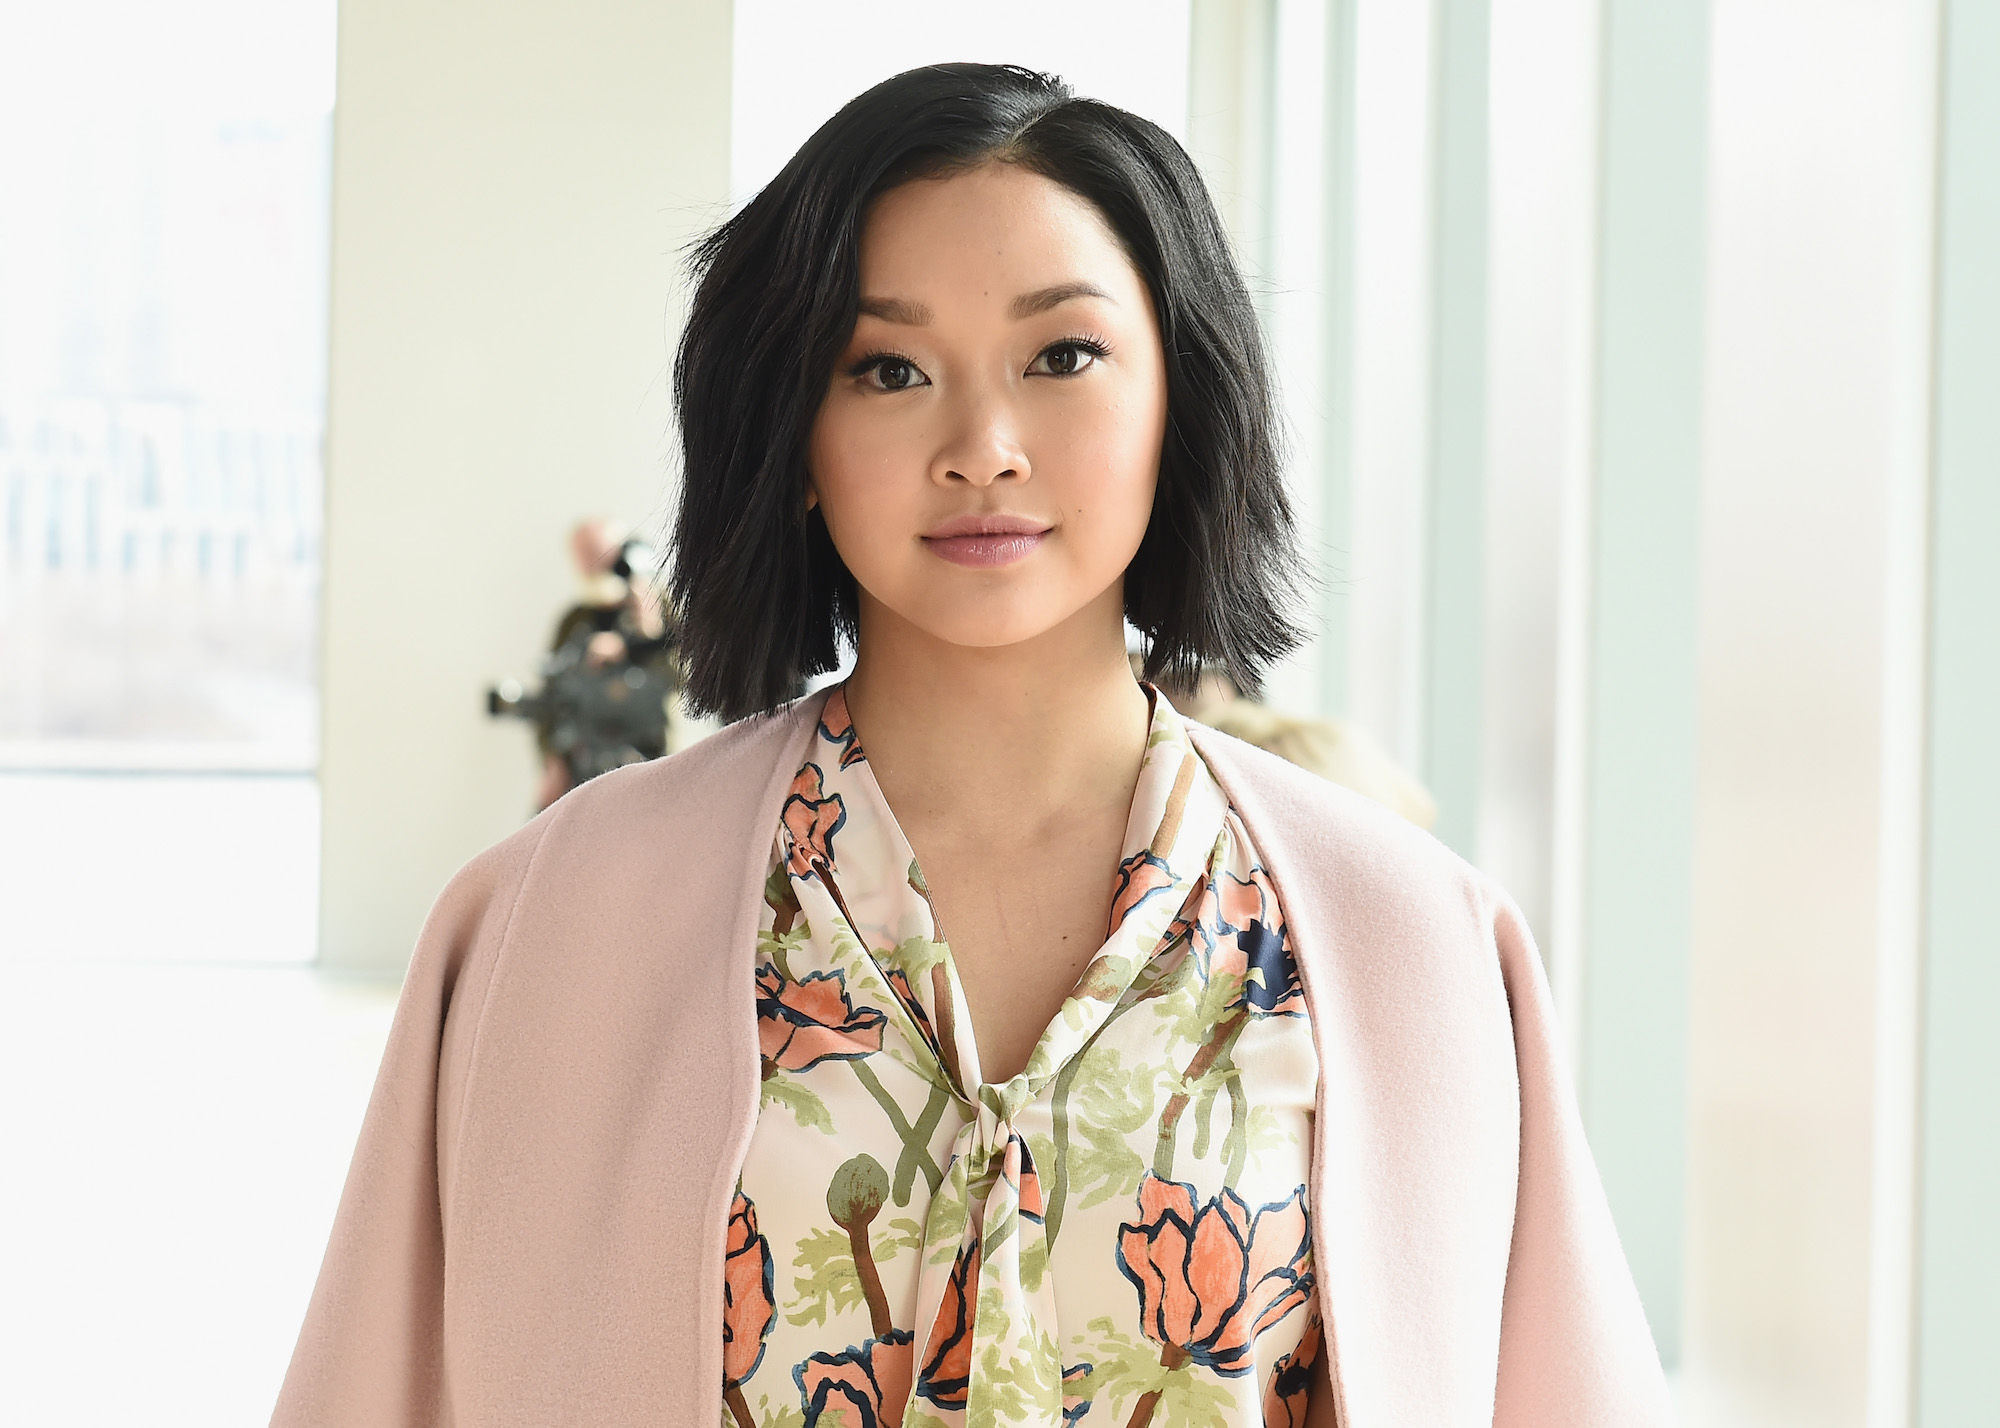 Lana Condor smiling at the camera, in front of a blurred white background